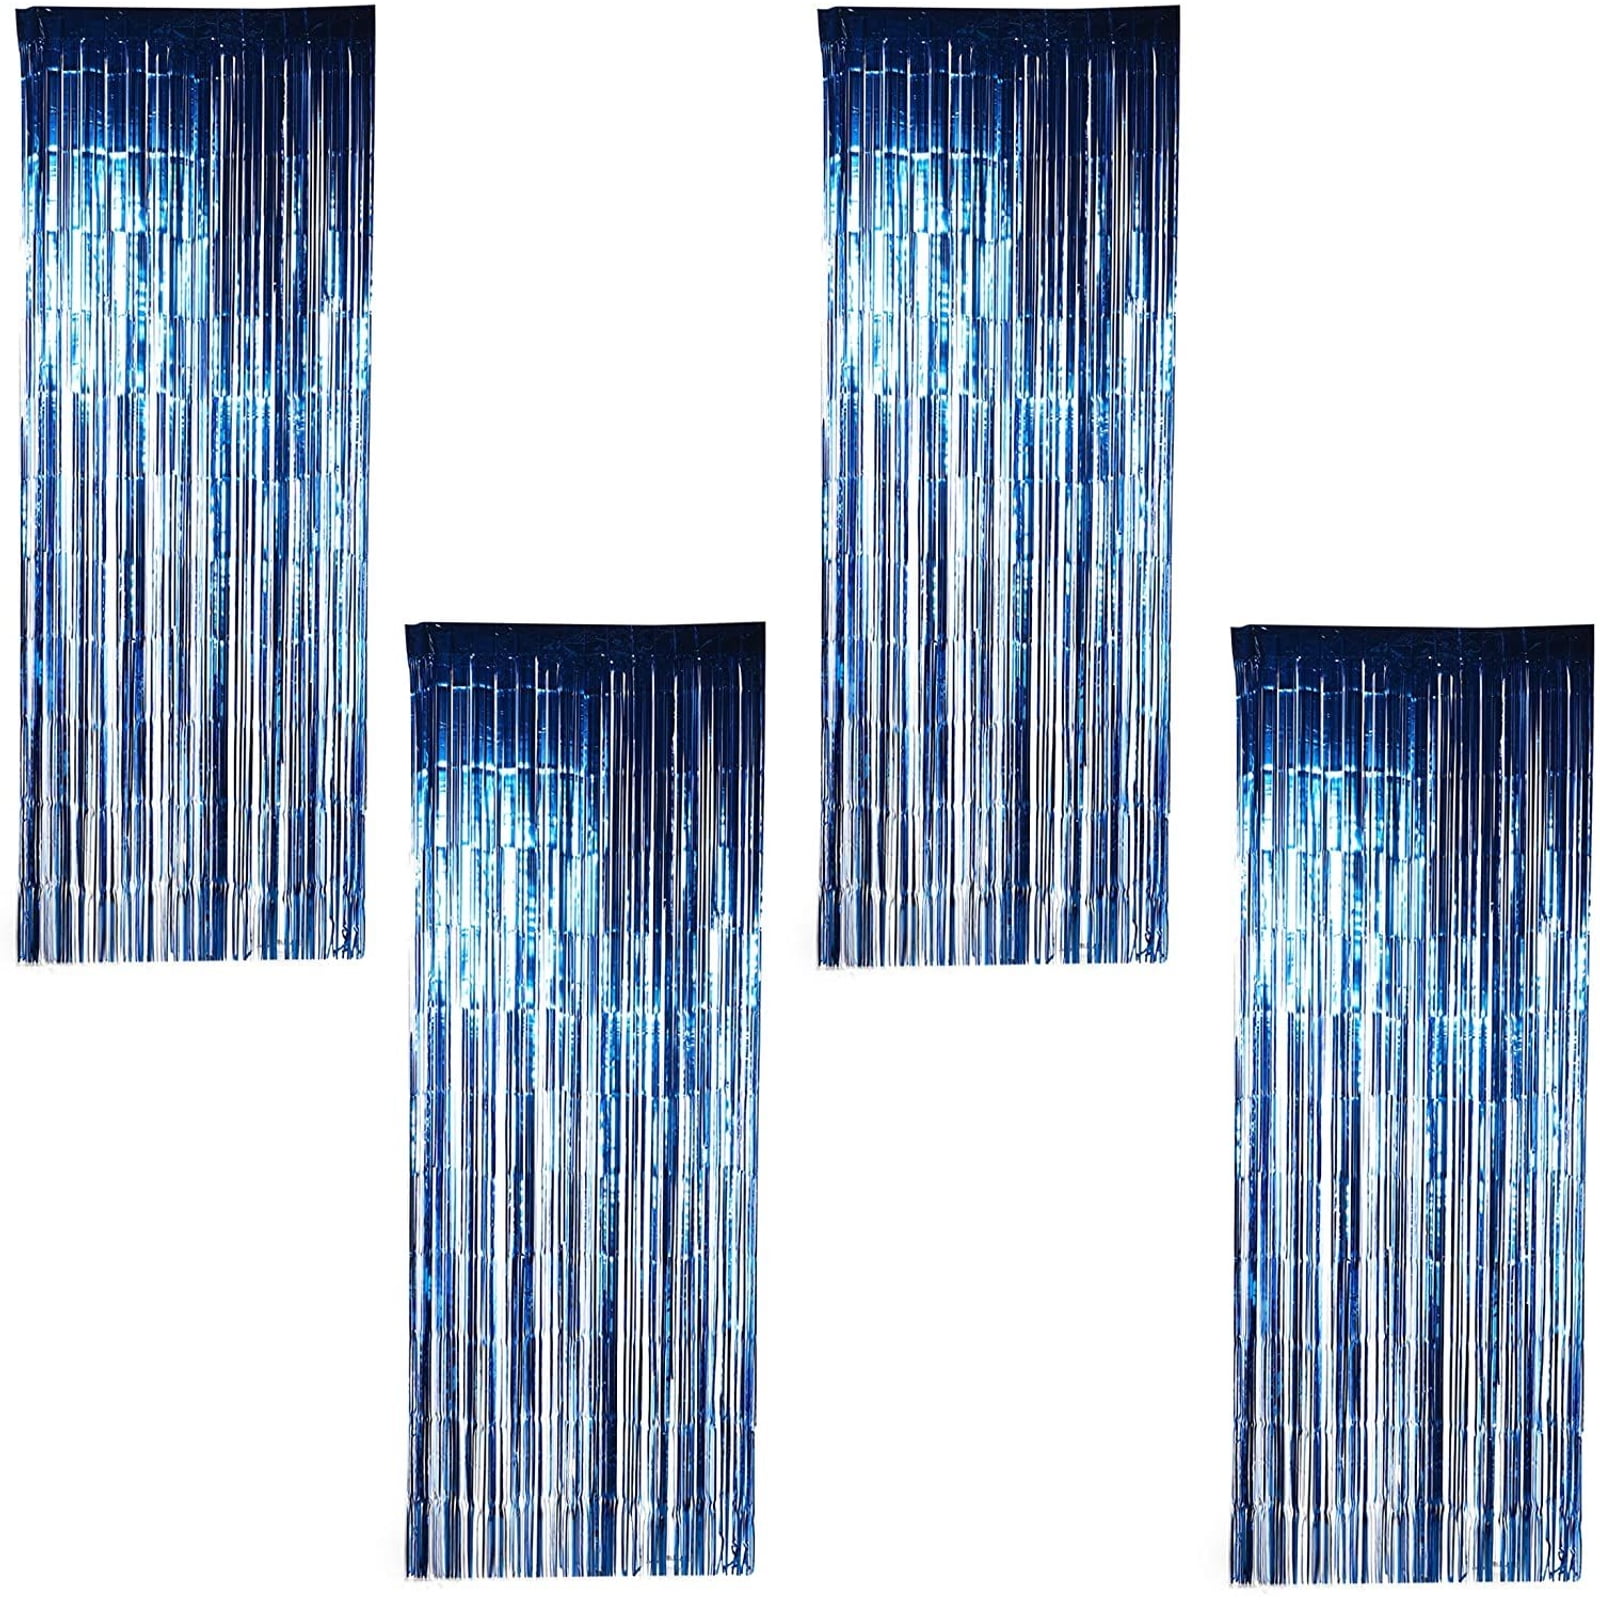 Treasures Gifted Pack of 2 Royal Blue Sparkling Foil Door 3 x 8 Feet Curtains Party Fringe Metallic Decorations Tinsel Window Supply for Under The Ocean Sea Themed Event 